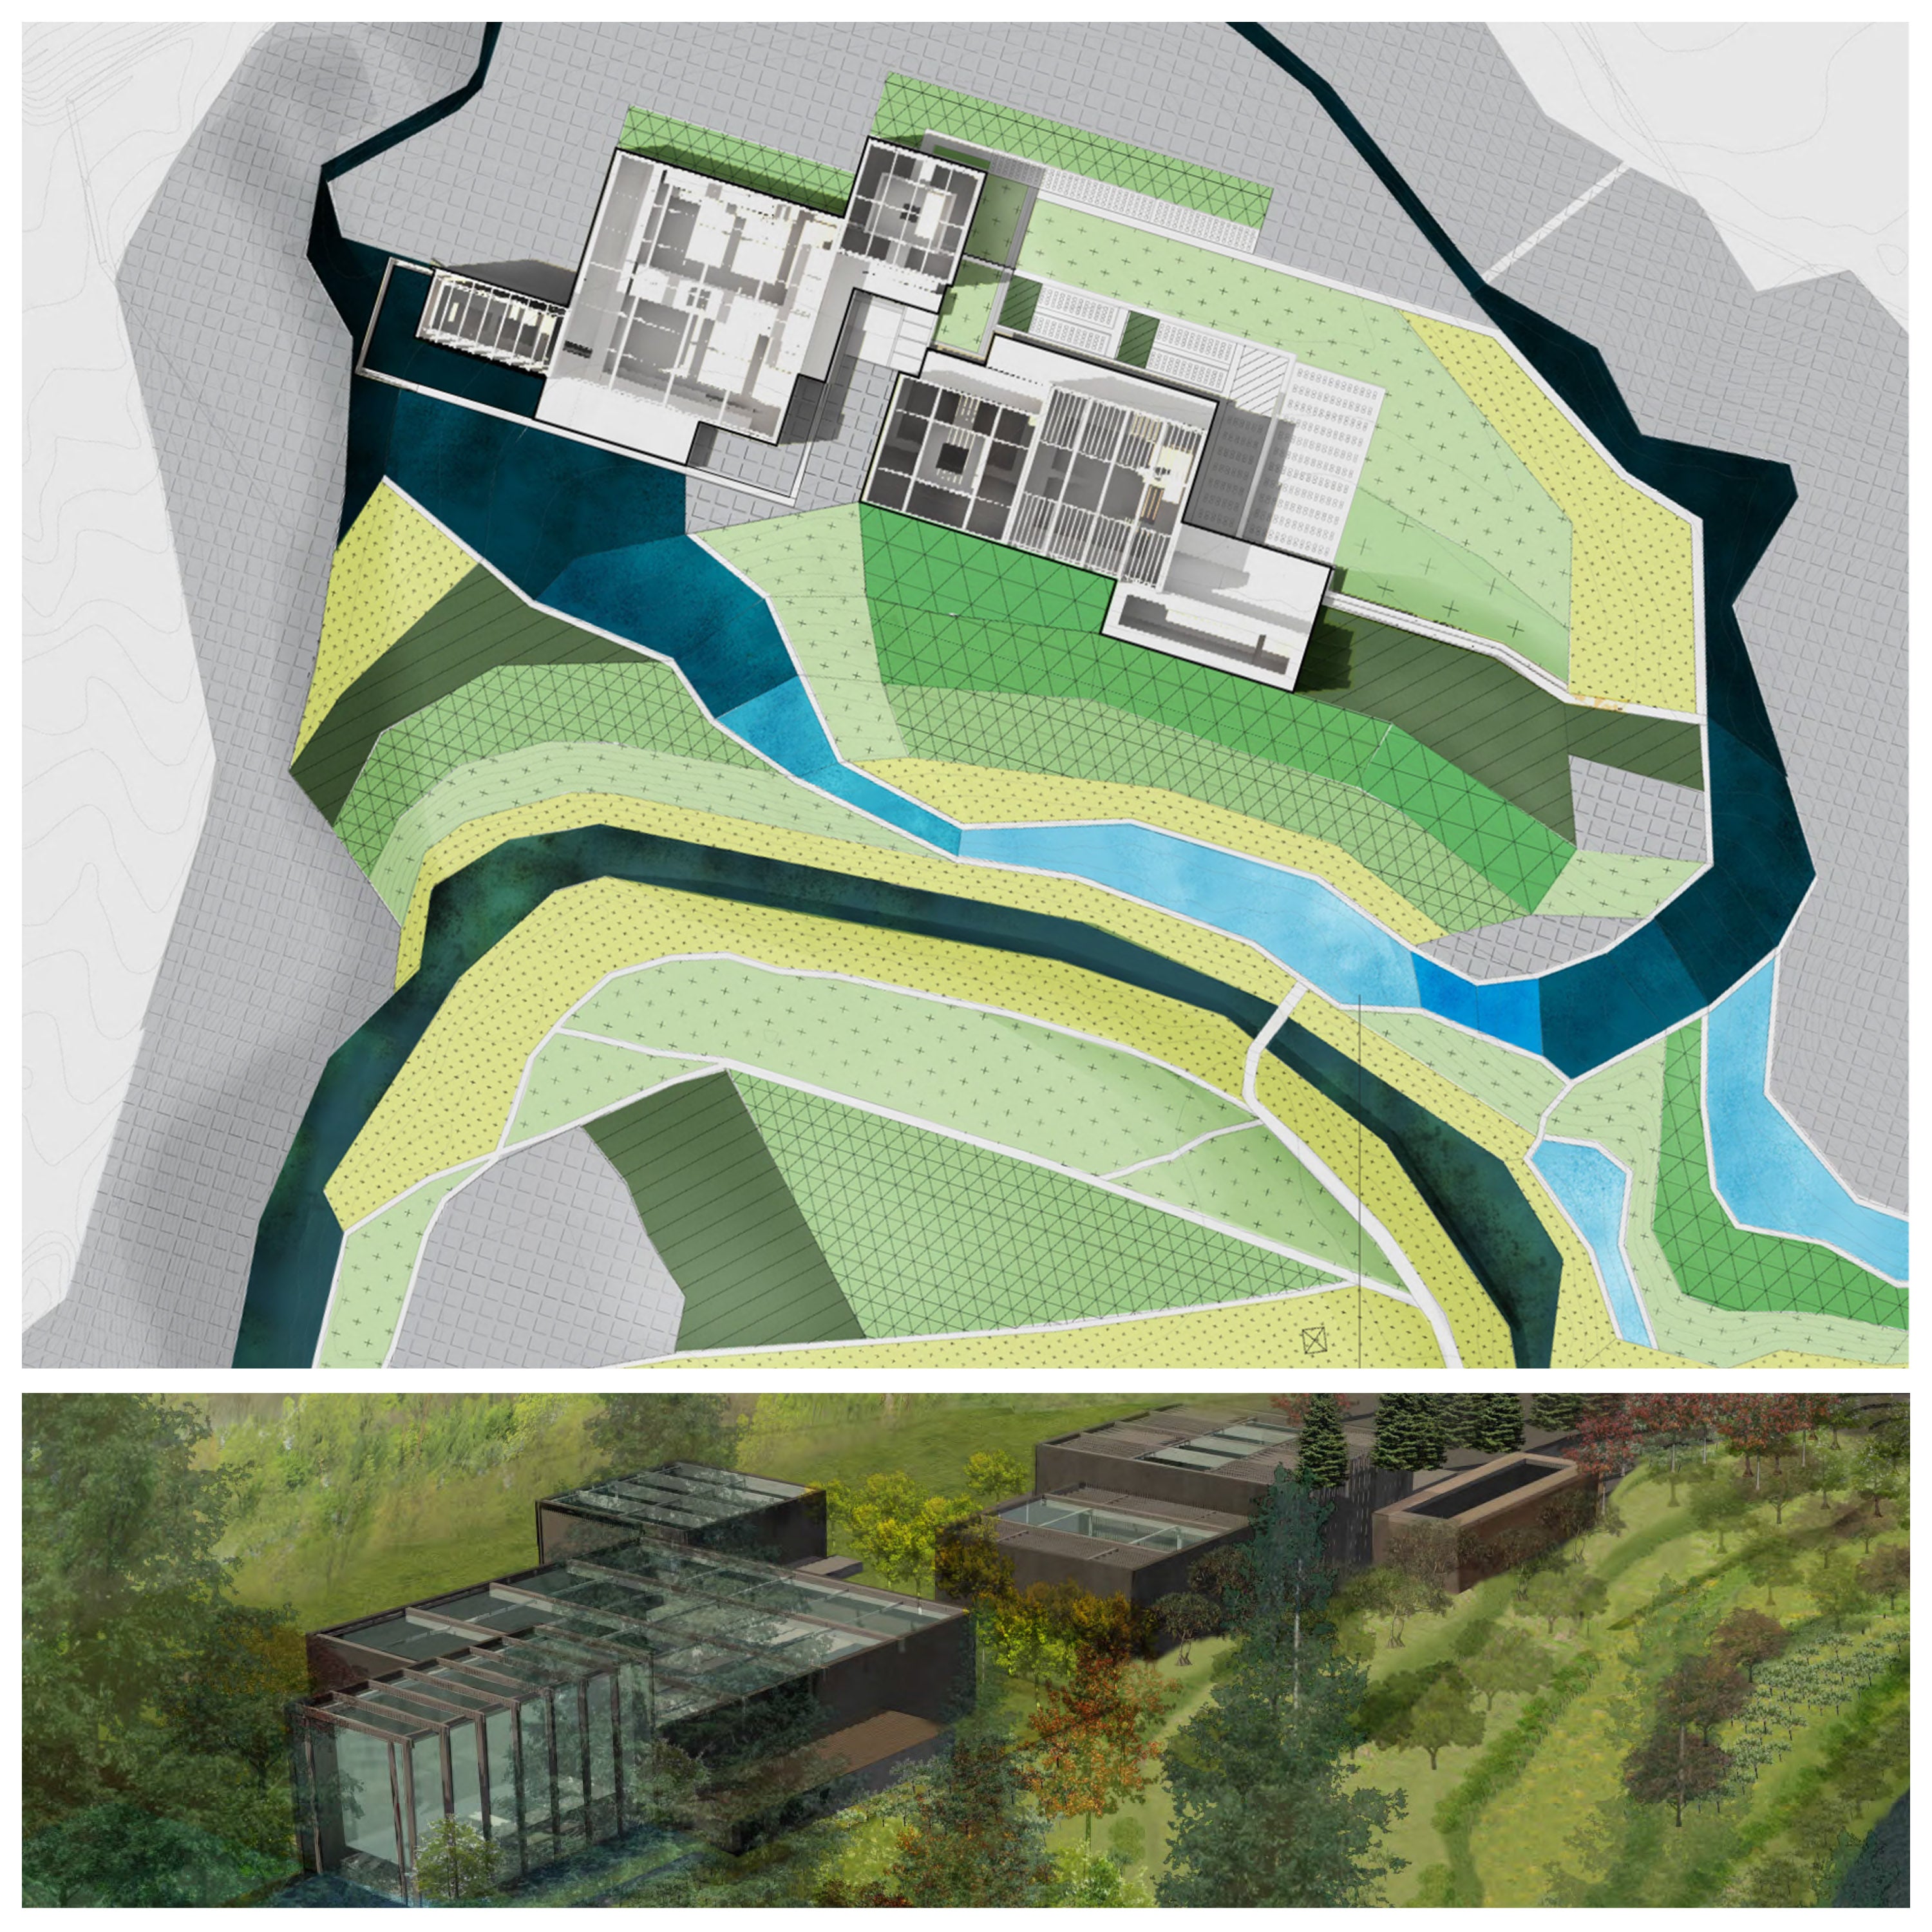 A presentation panel showing a rendered site plan drawing and an aerial render of the building.